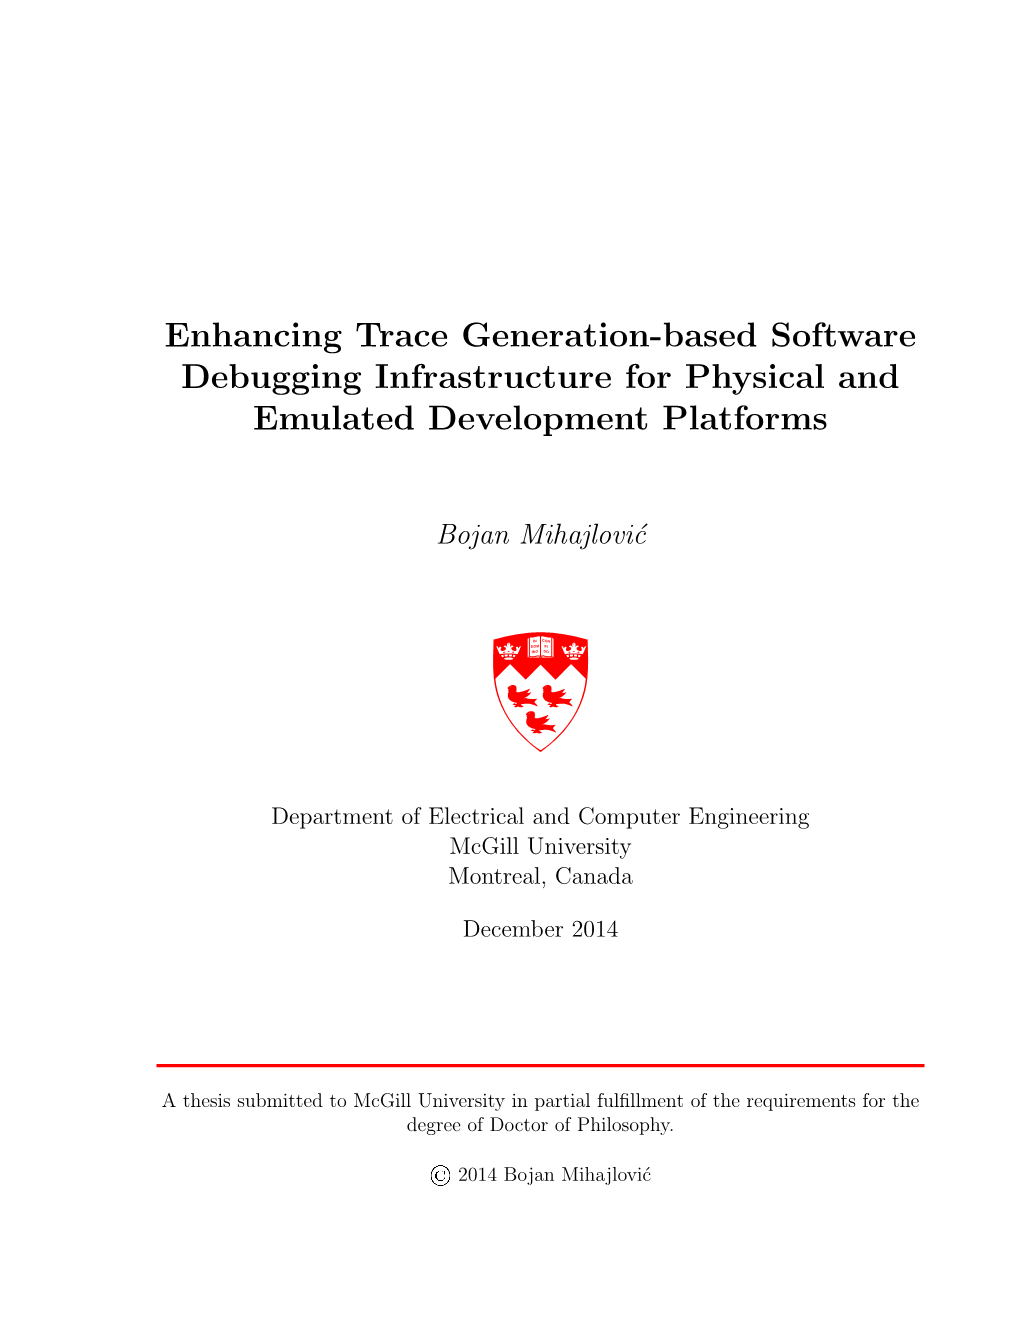 Enhancing Trace Generation-Based Software Debugging Infrastructure for Physical and Emulated Development Platforms